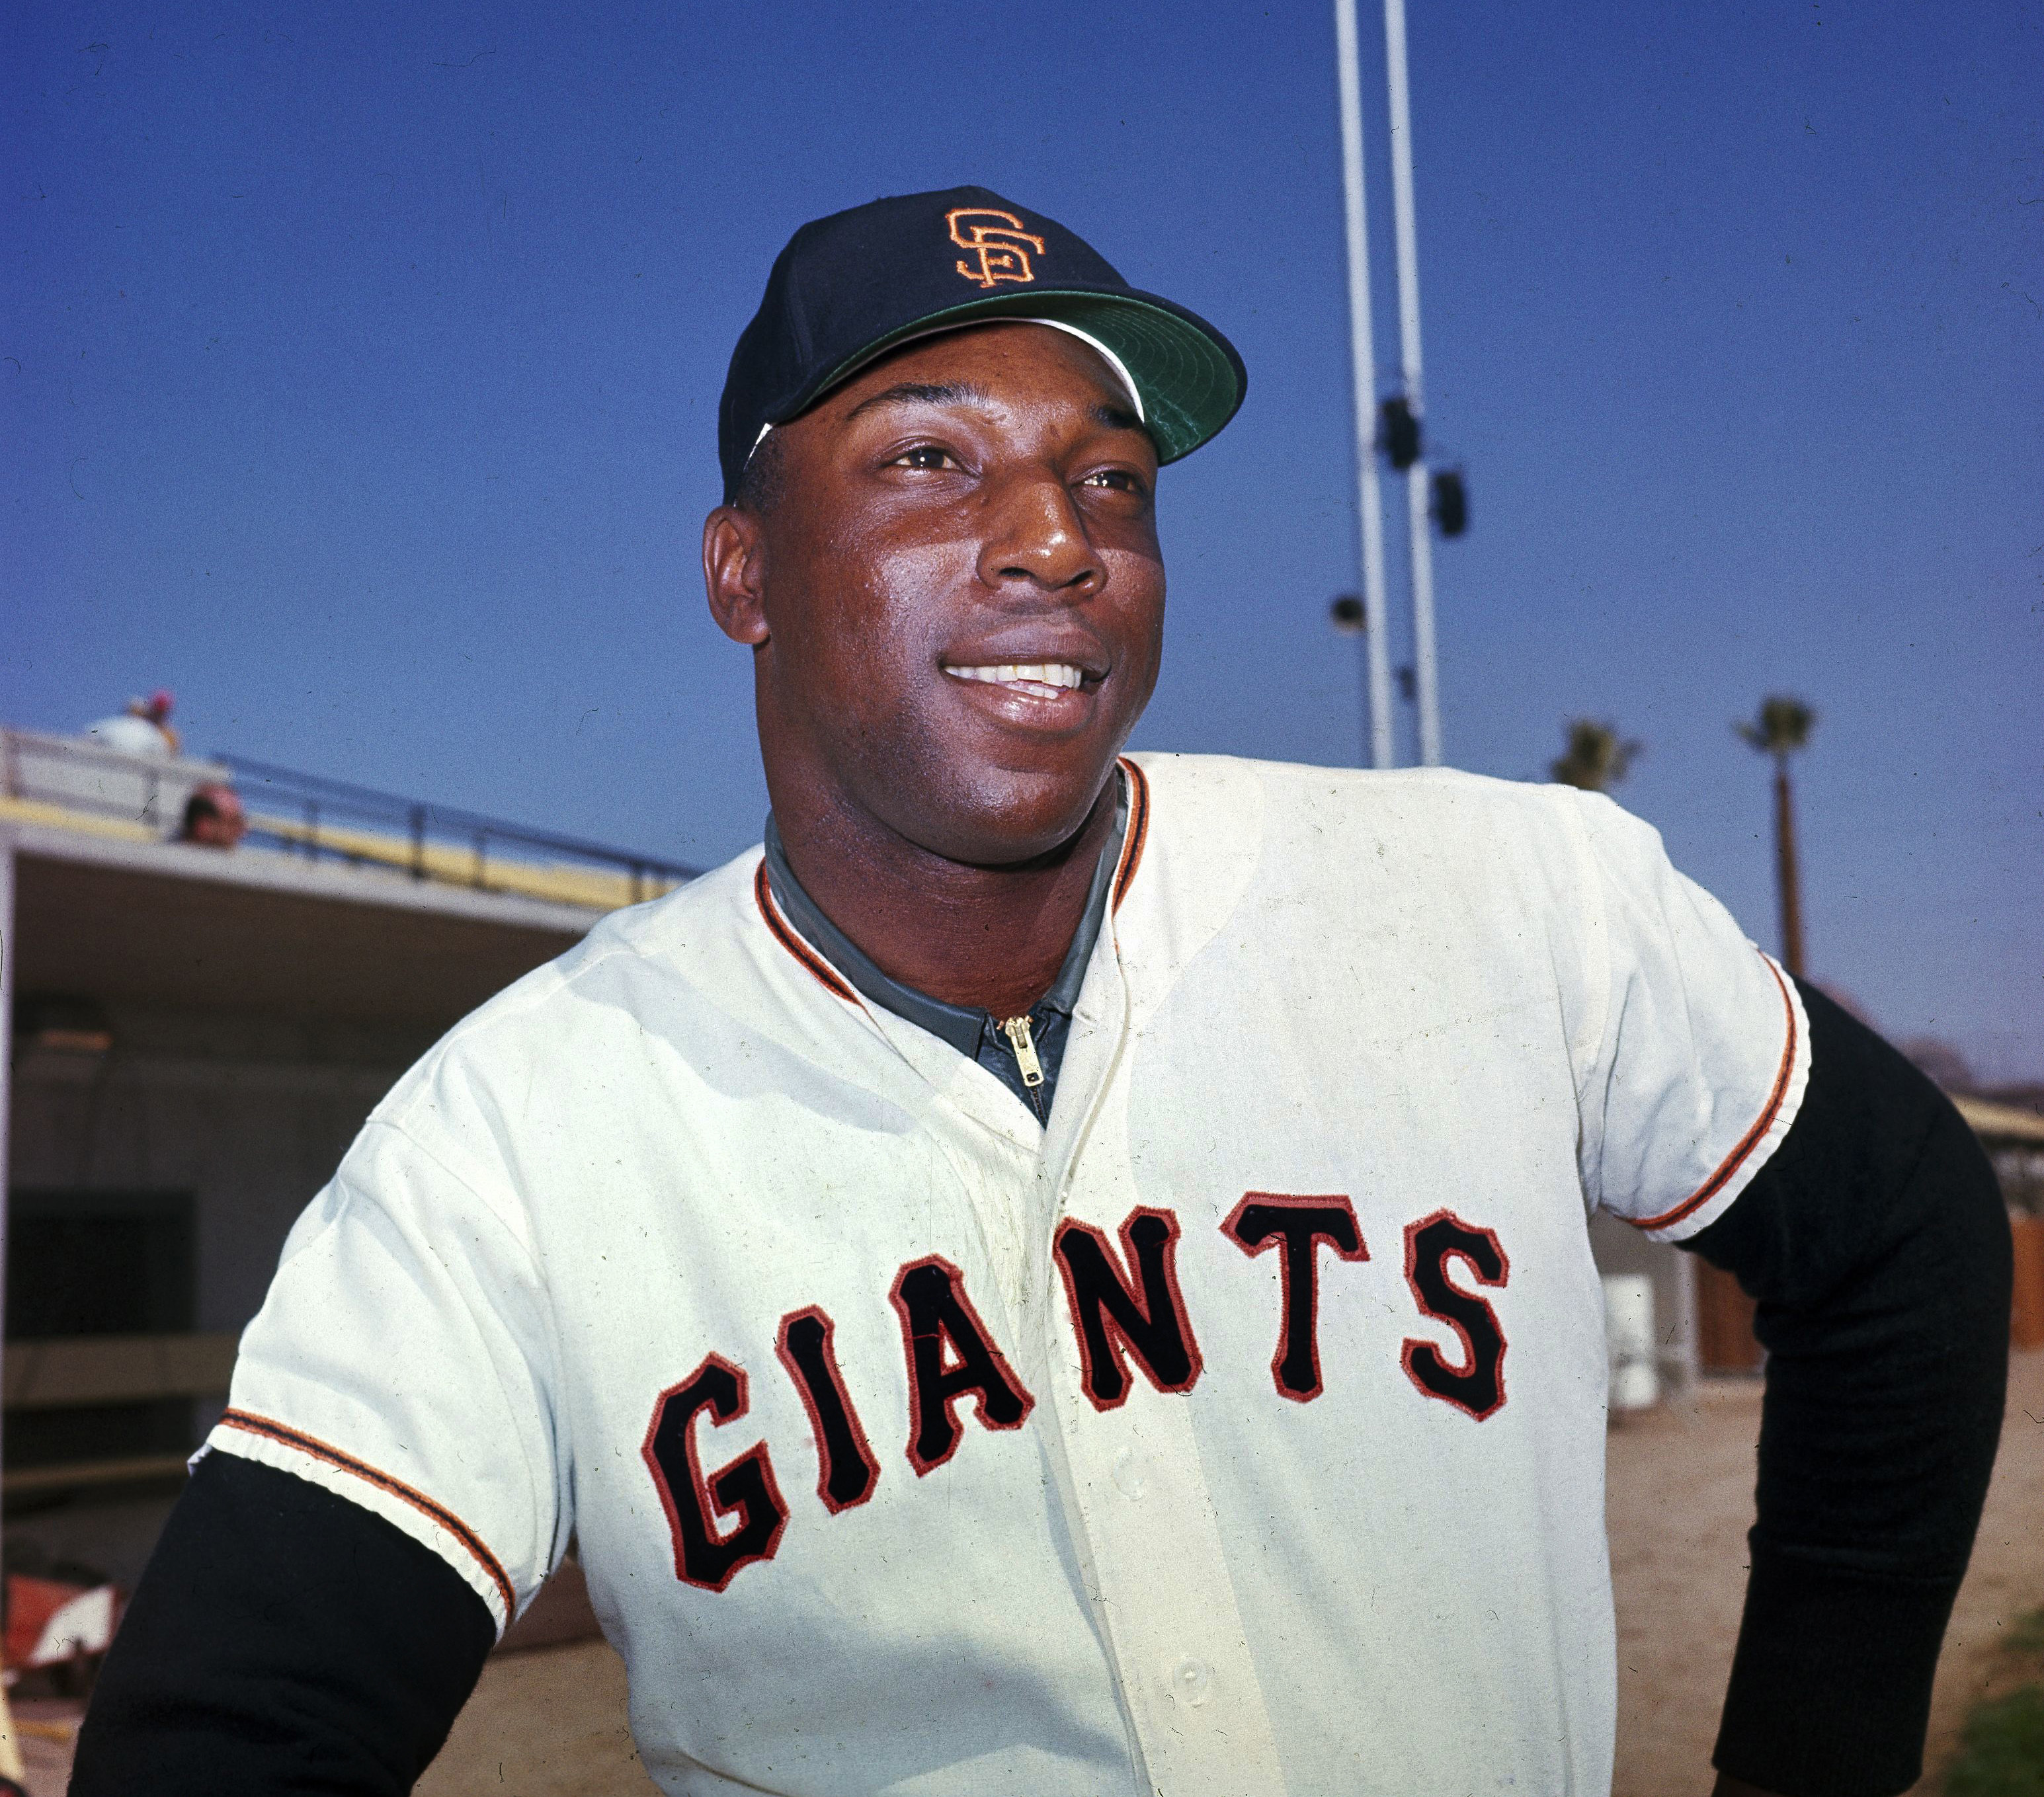 June 1, 1962: Willie Mays, Giants return to New York for first